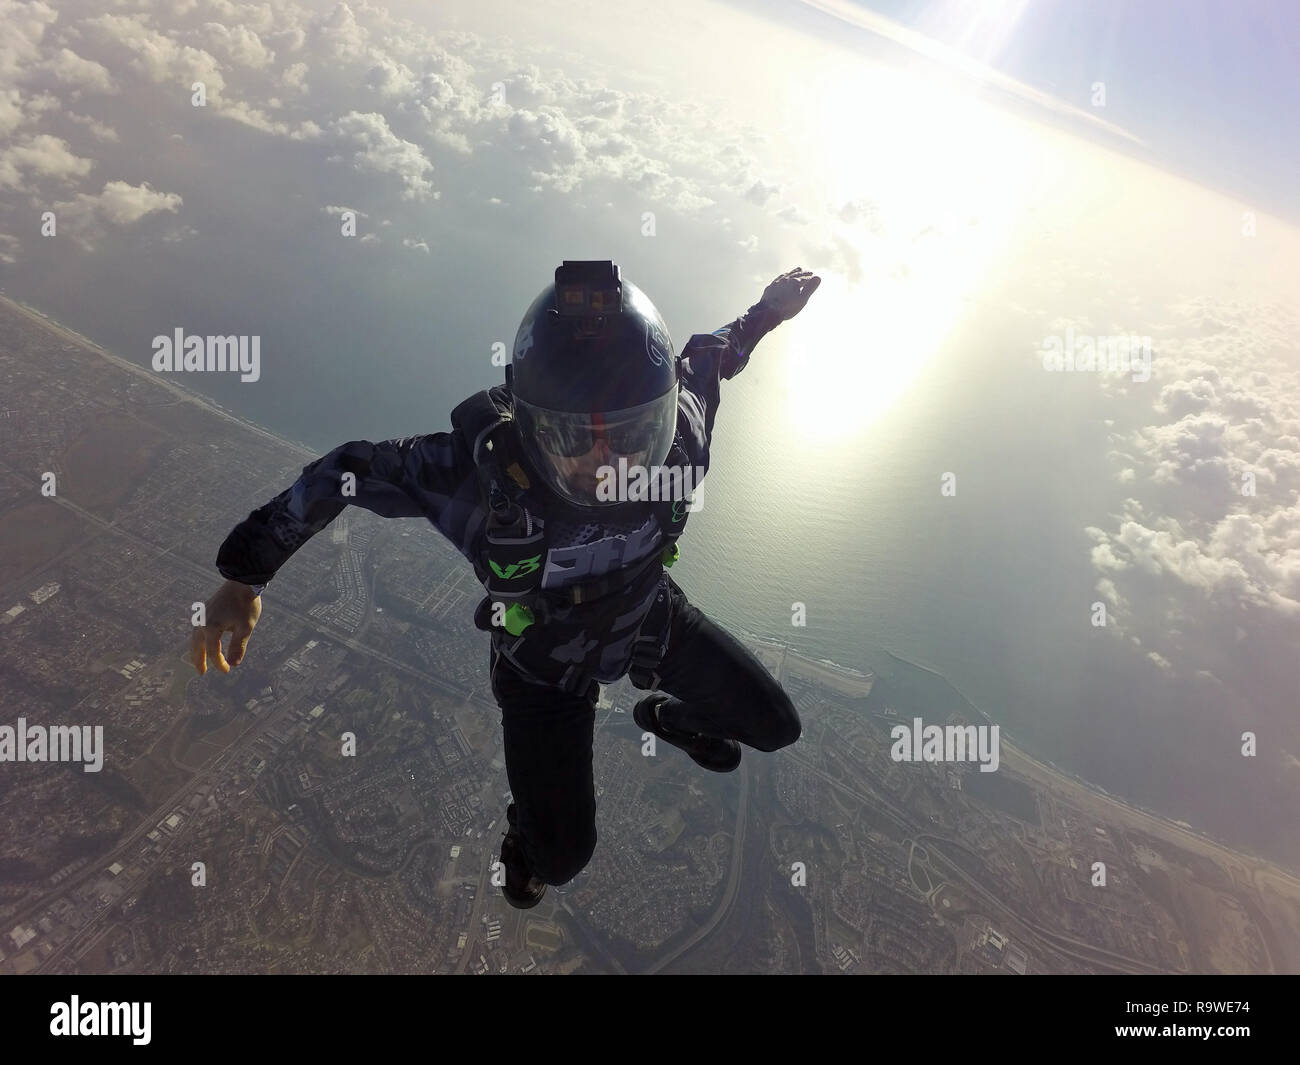 This freefly skydiver is practice different freestyle positions in the blue sky over some clouds with a big smile on his face. Stock Photo